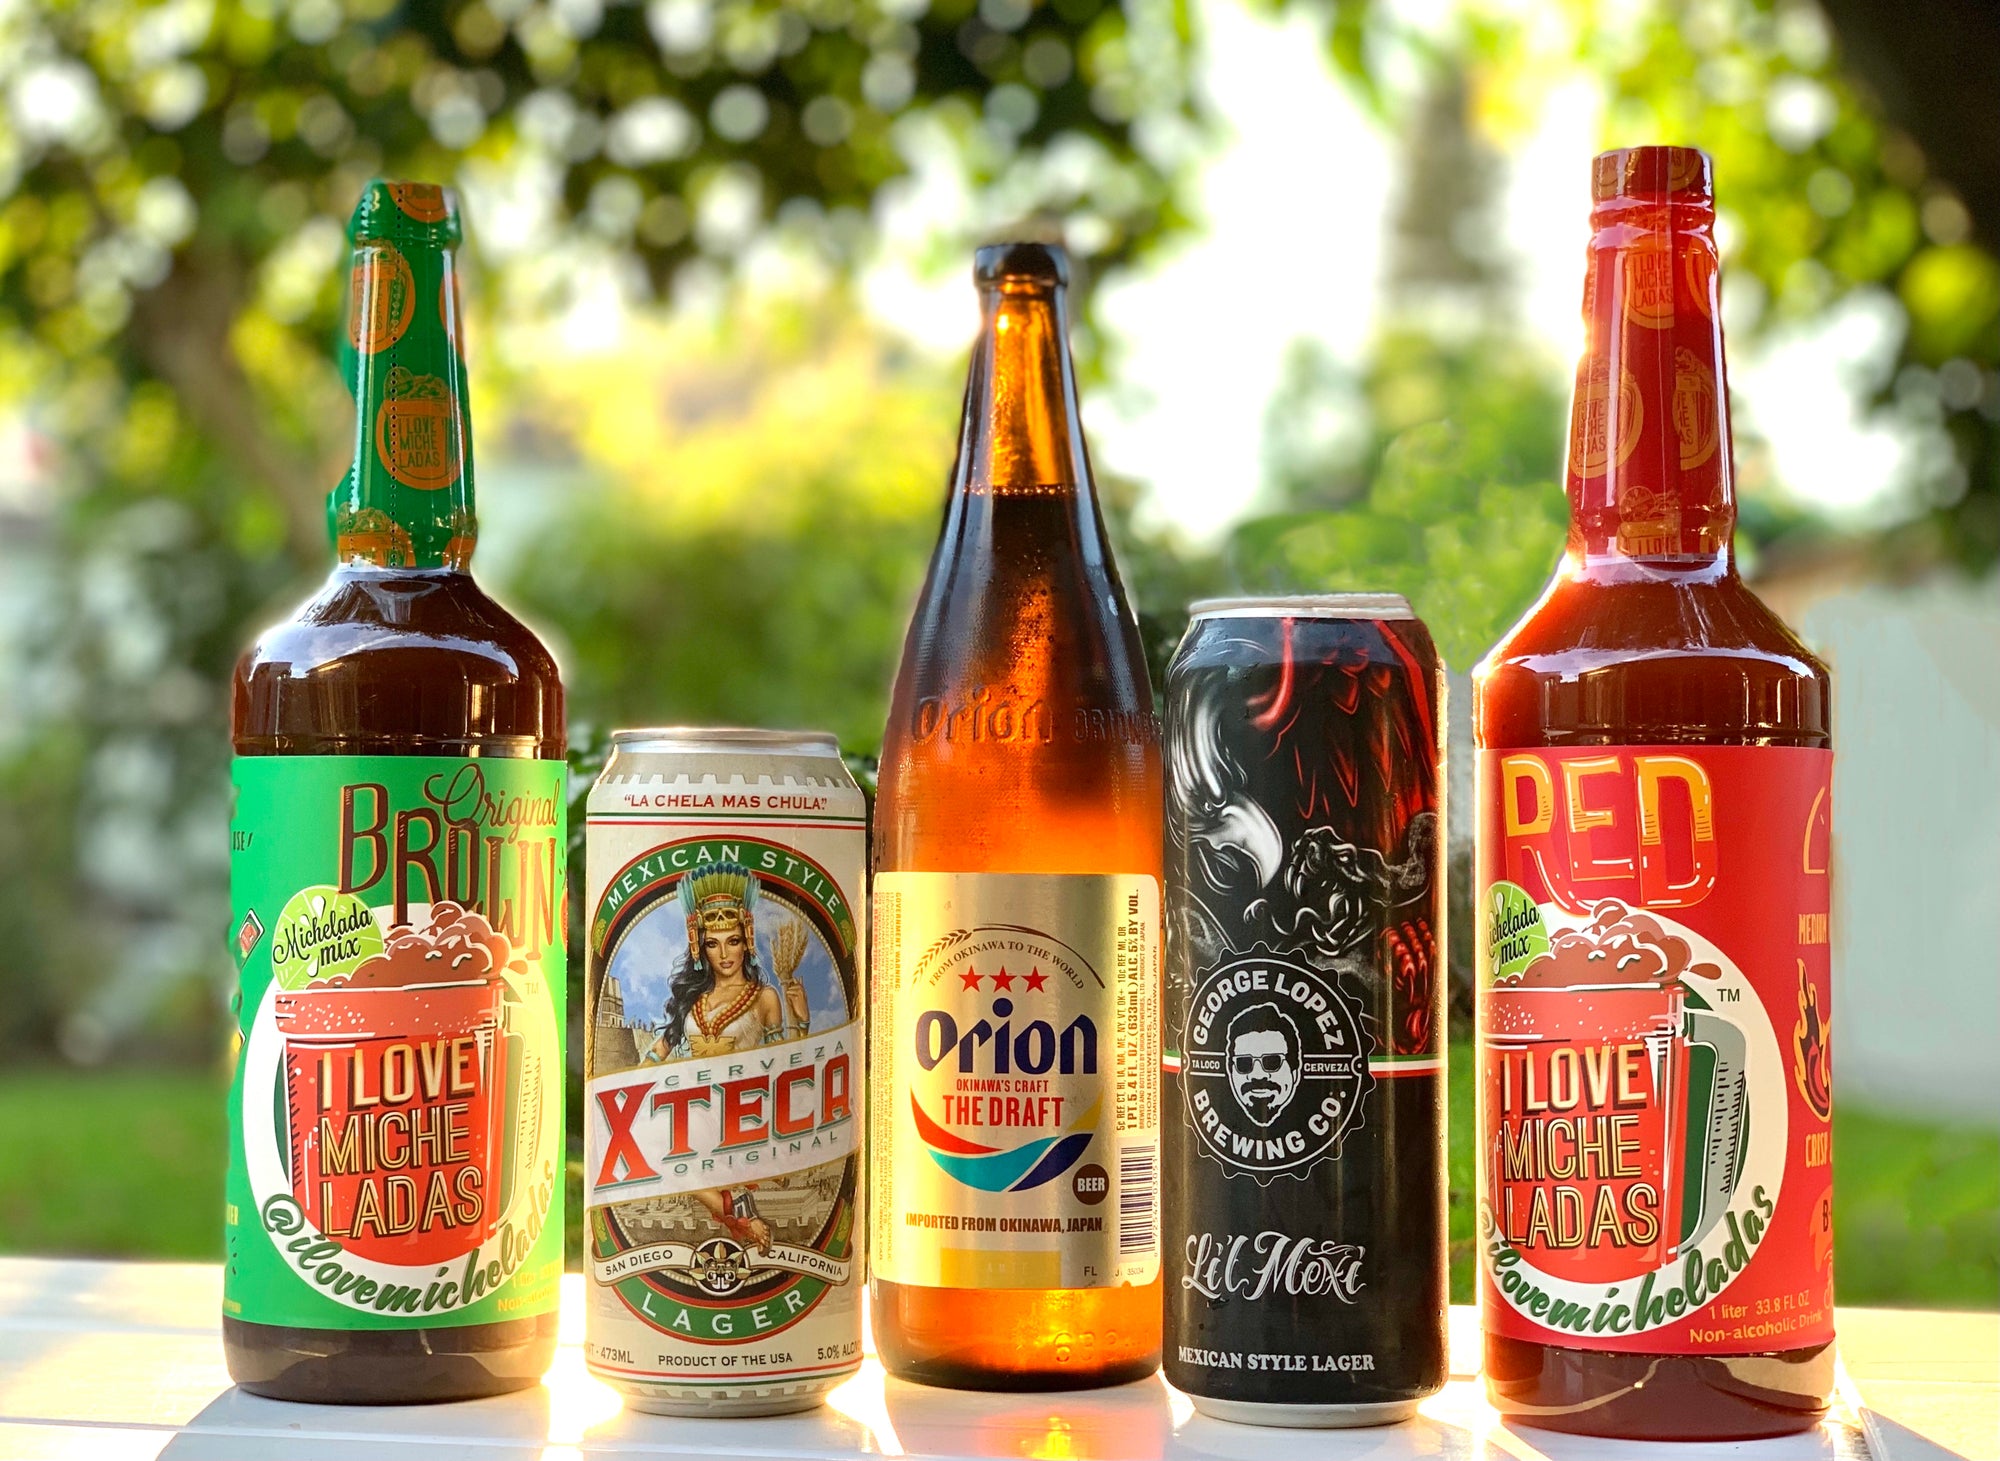 BEER RUN OF THE WEEK: WILL ANY OF THESE BEERS BE AS COMPATIBLE WITH OUR “I LOVE MICHELADAS” MIXES AS JLO AND BEN AFFLECK HAVE BEEN WITH EACH OTHER LATELY?